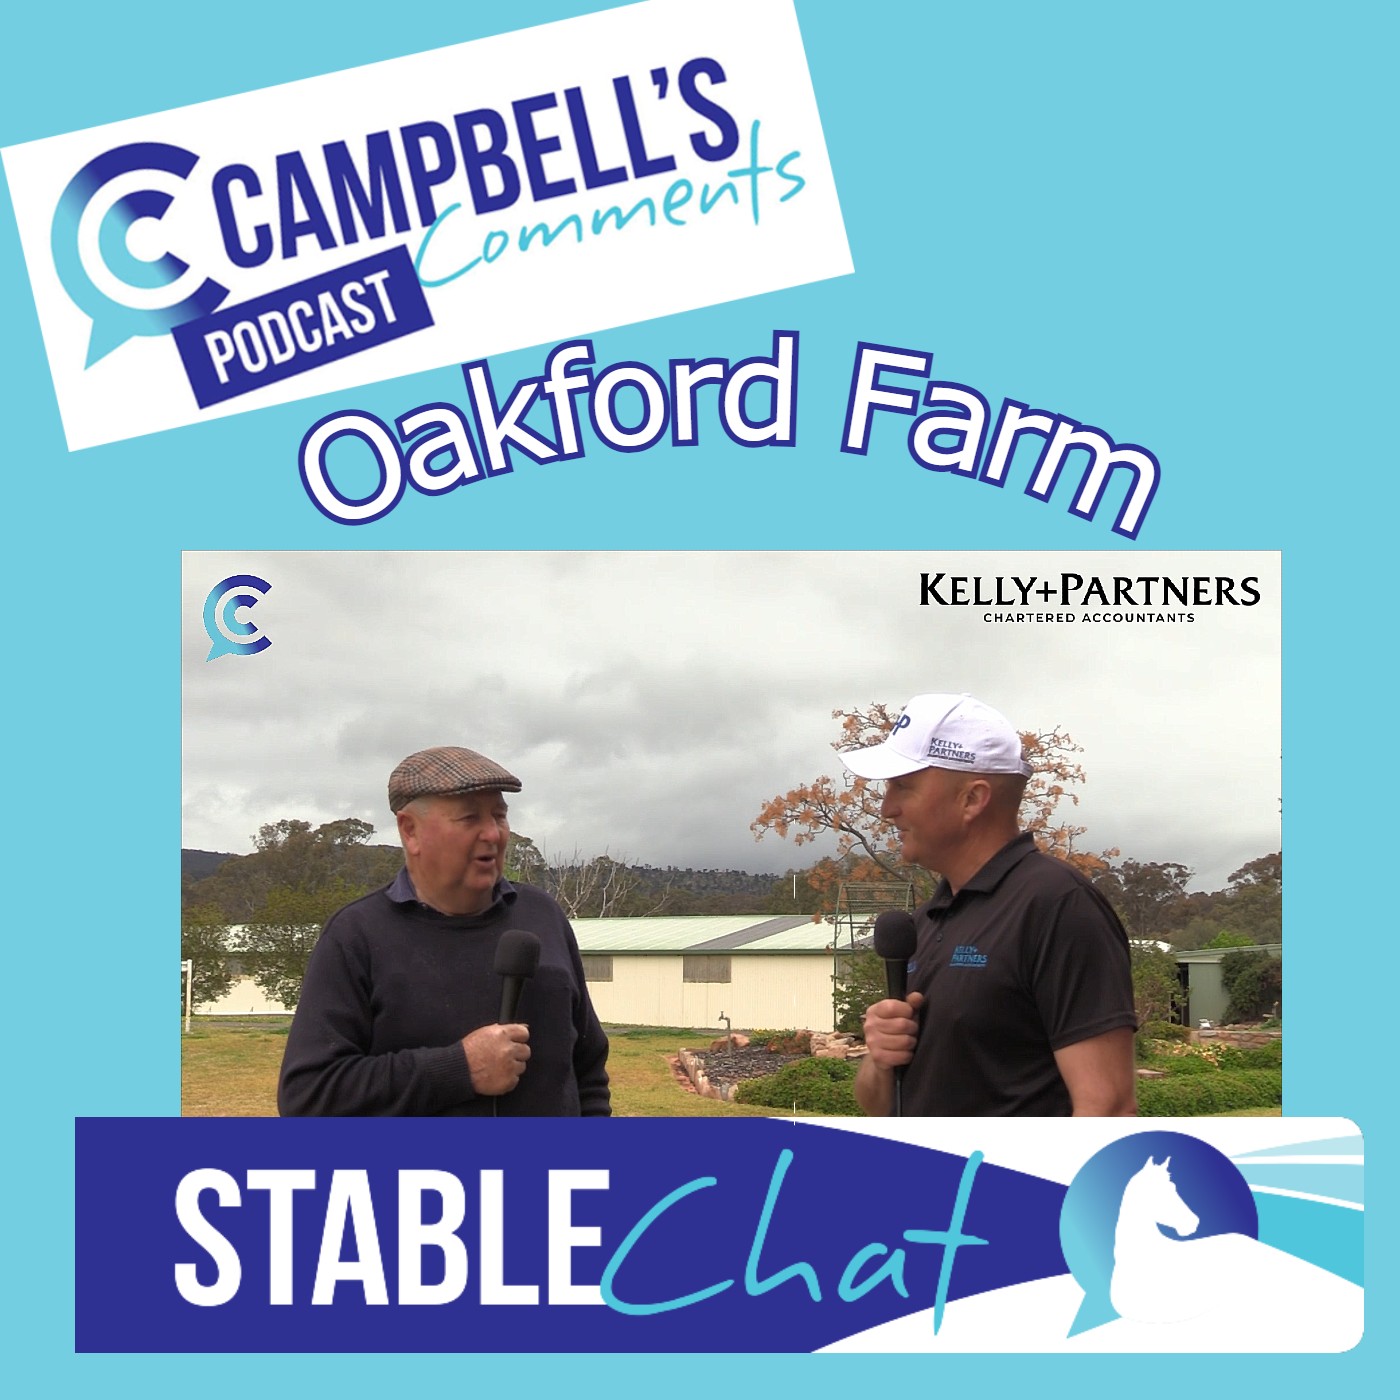 You are currently viewing 136: Stable Chat with Oakford Farm thanks to Kelly Partners